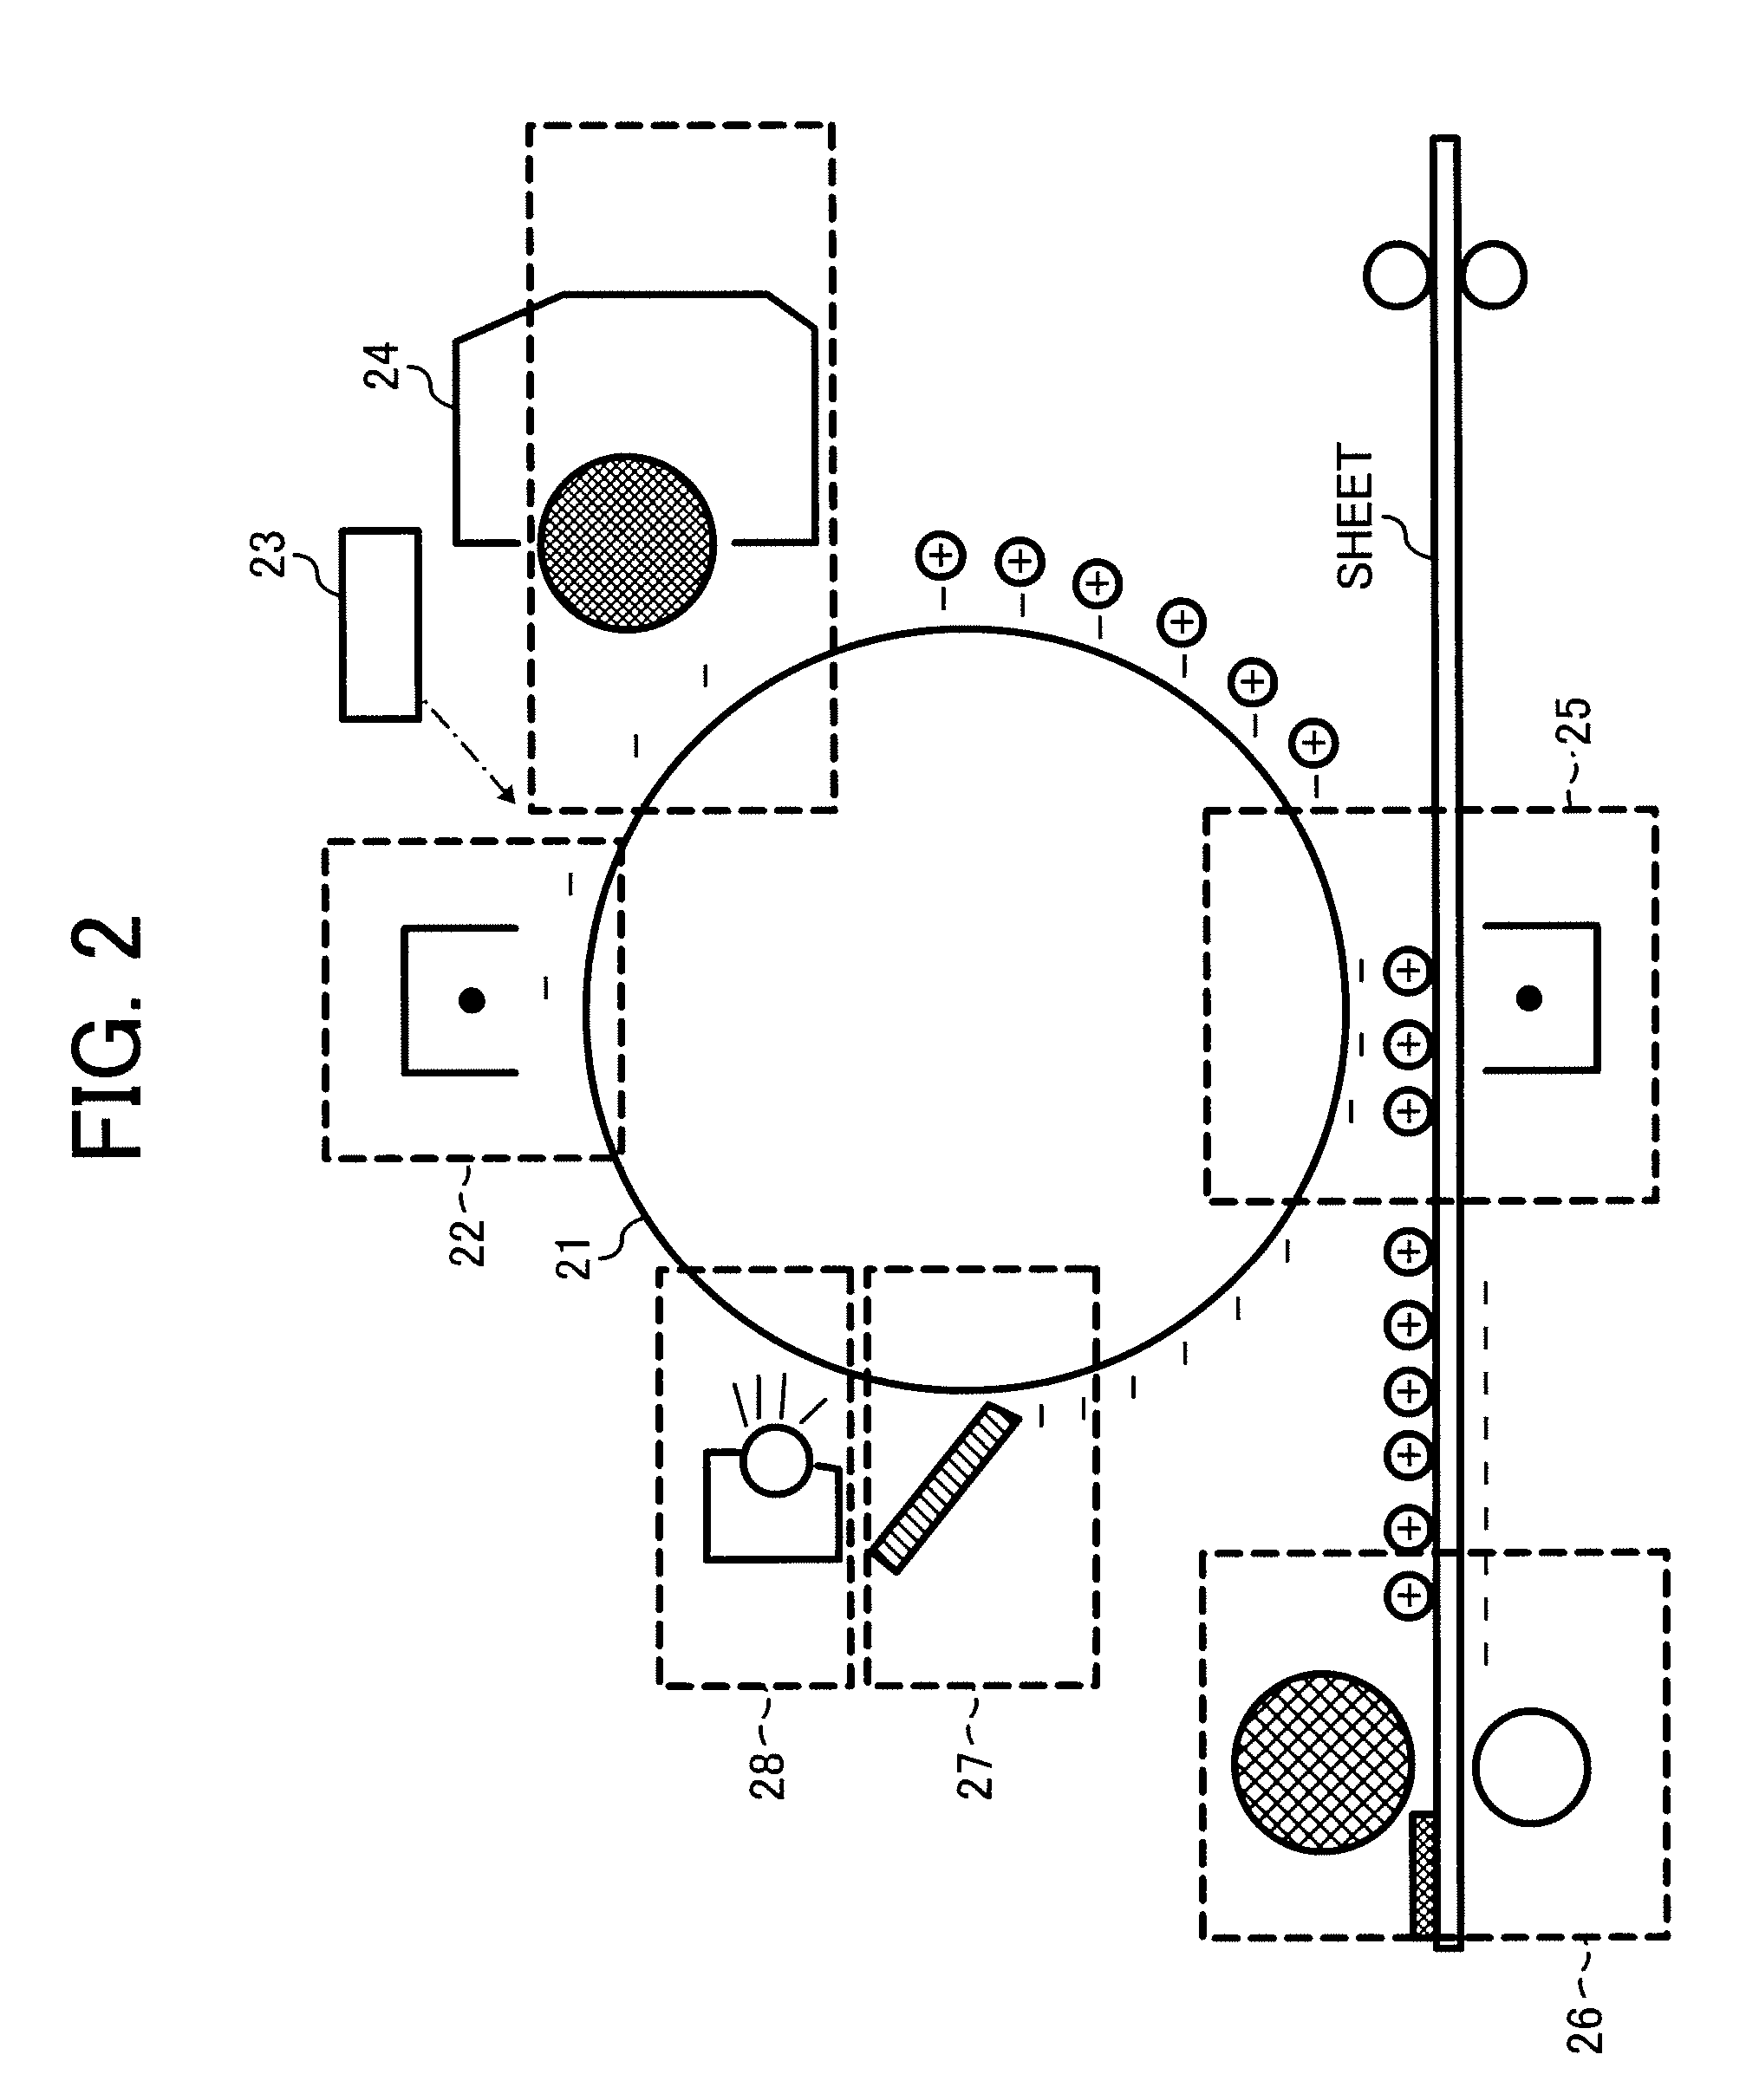 Image forming apparatus having enhanced management for consumable-supplies